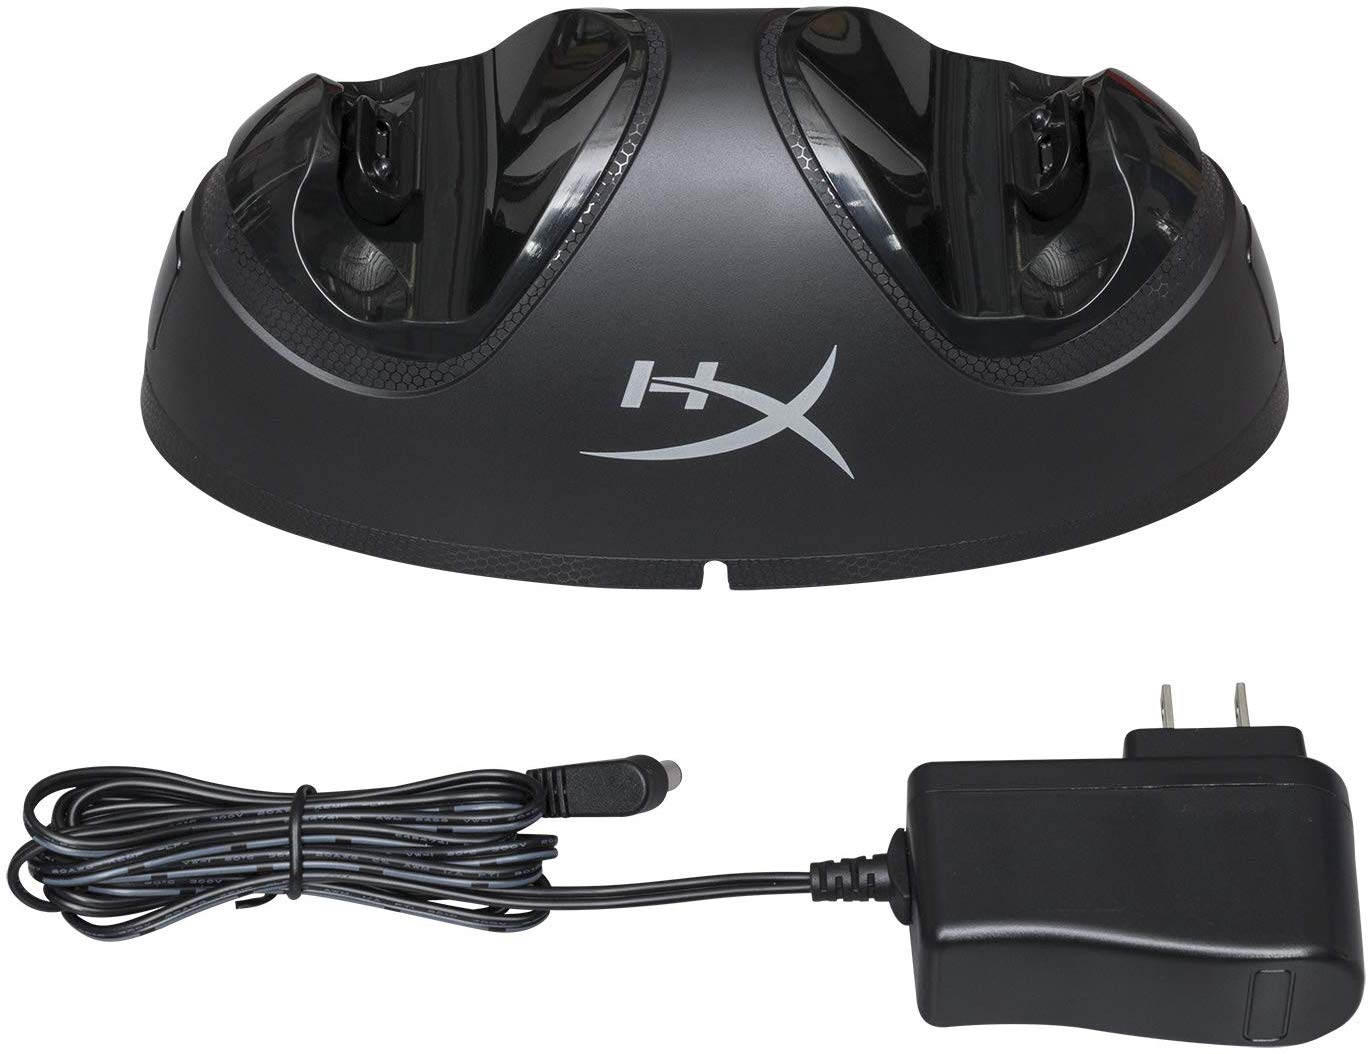 Hyperx charger game pad ps4 duo controller